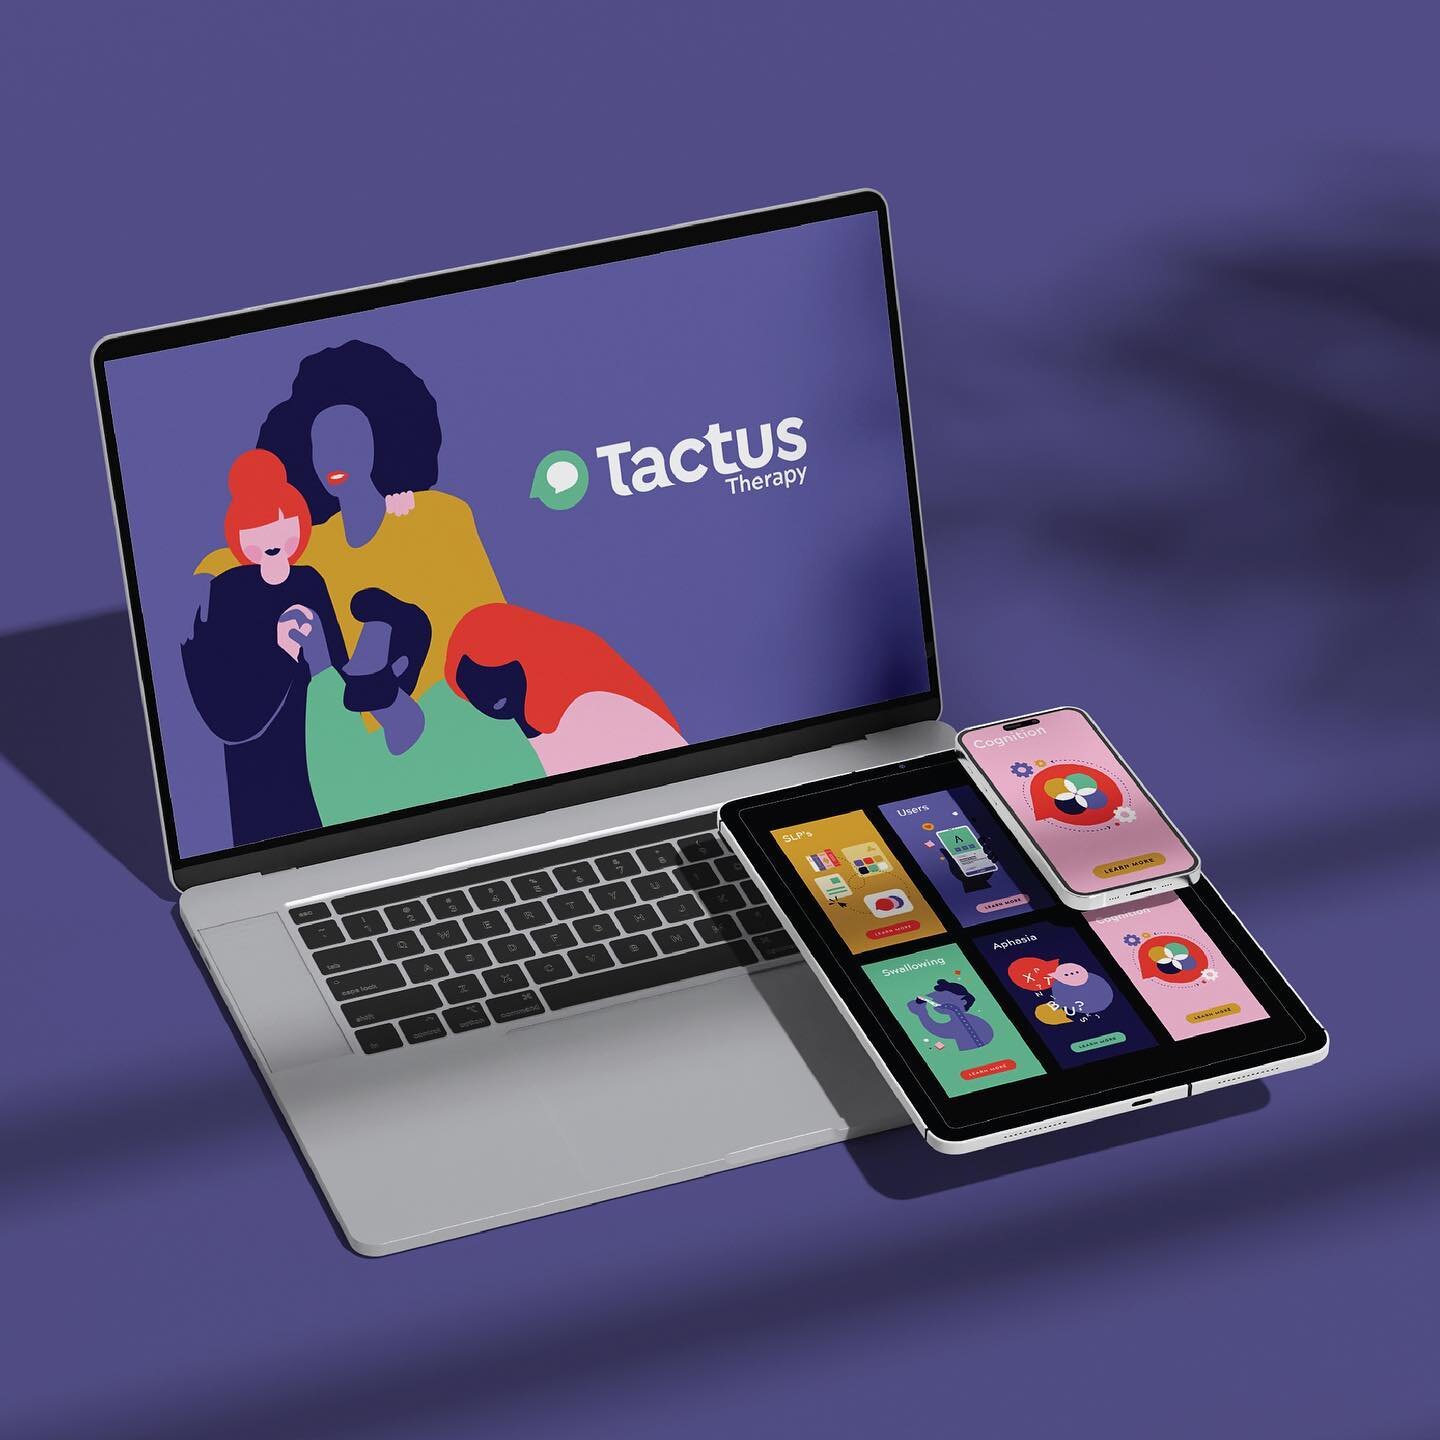 Re-brand, illustrations, and app designs for Tactus therapy.